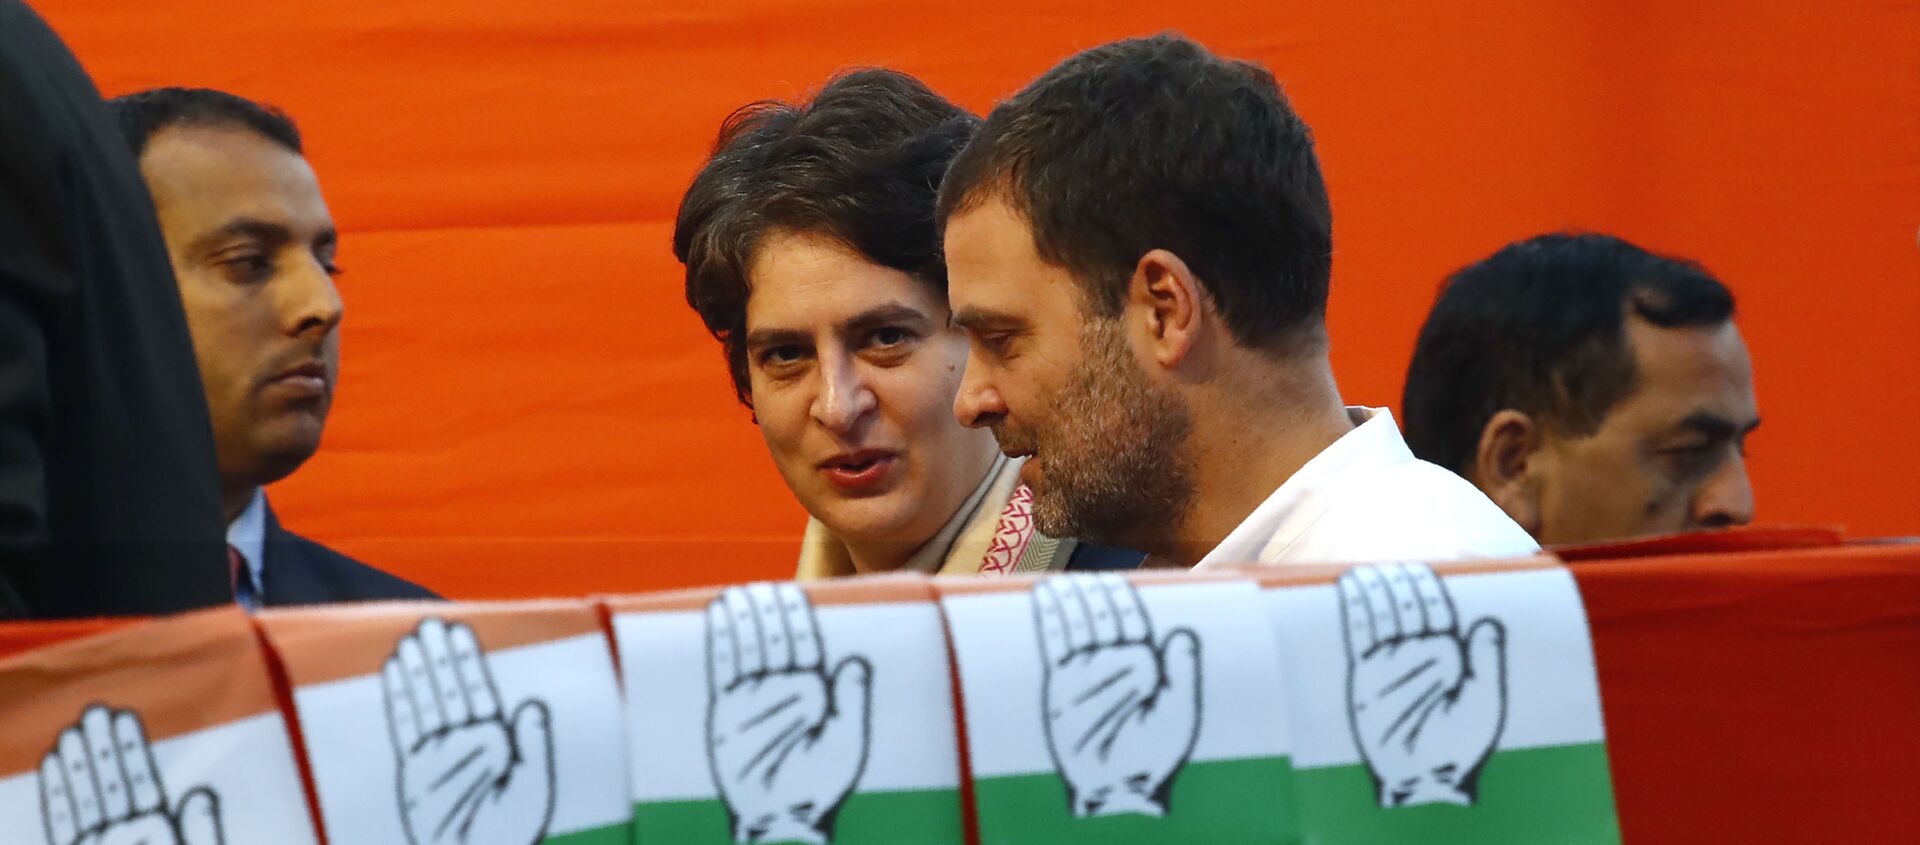 Congress party leader Rahul Gandhi, center, talks to his sister and party General Secretary Priyanka Vadra, as they arrive for an election campaign rally for the upcoming Delhi elections, in New Delhi, India, Tuesday, Feb. 4, 2020 - Sputnik International, 1920, 26.07.2021